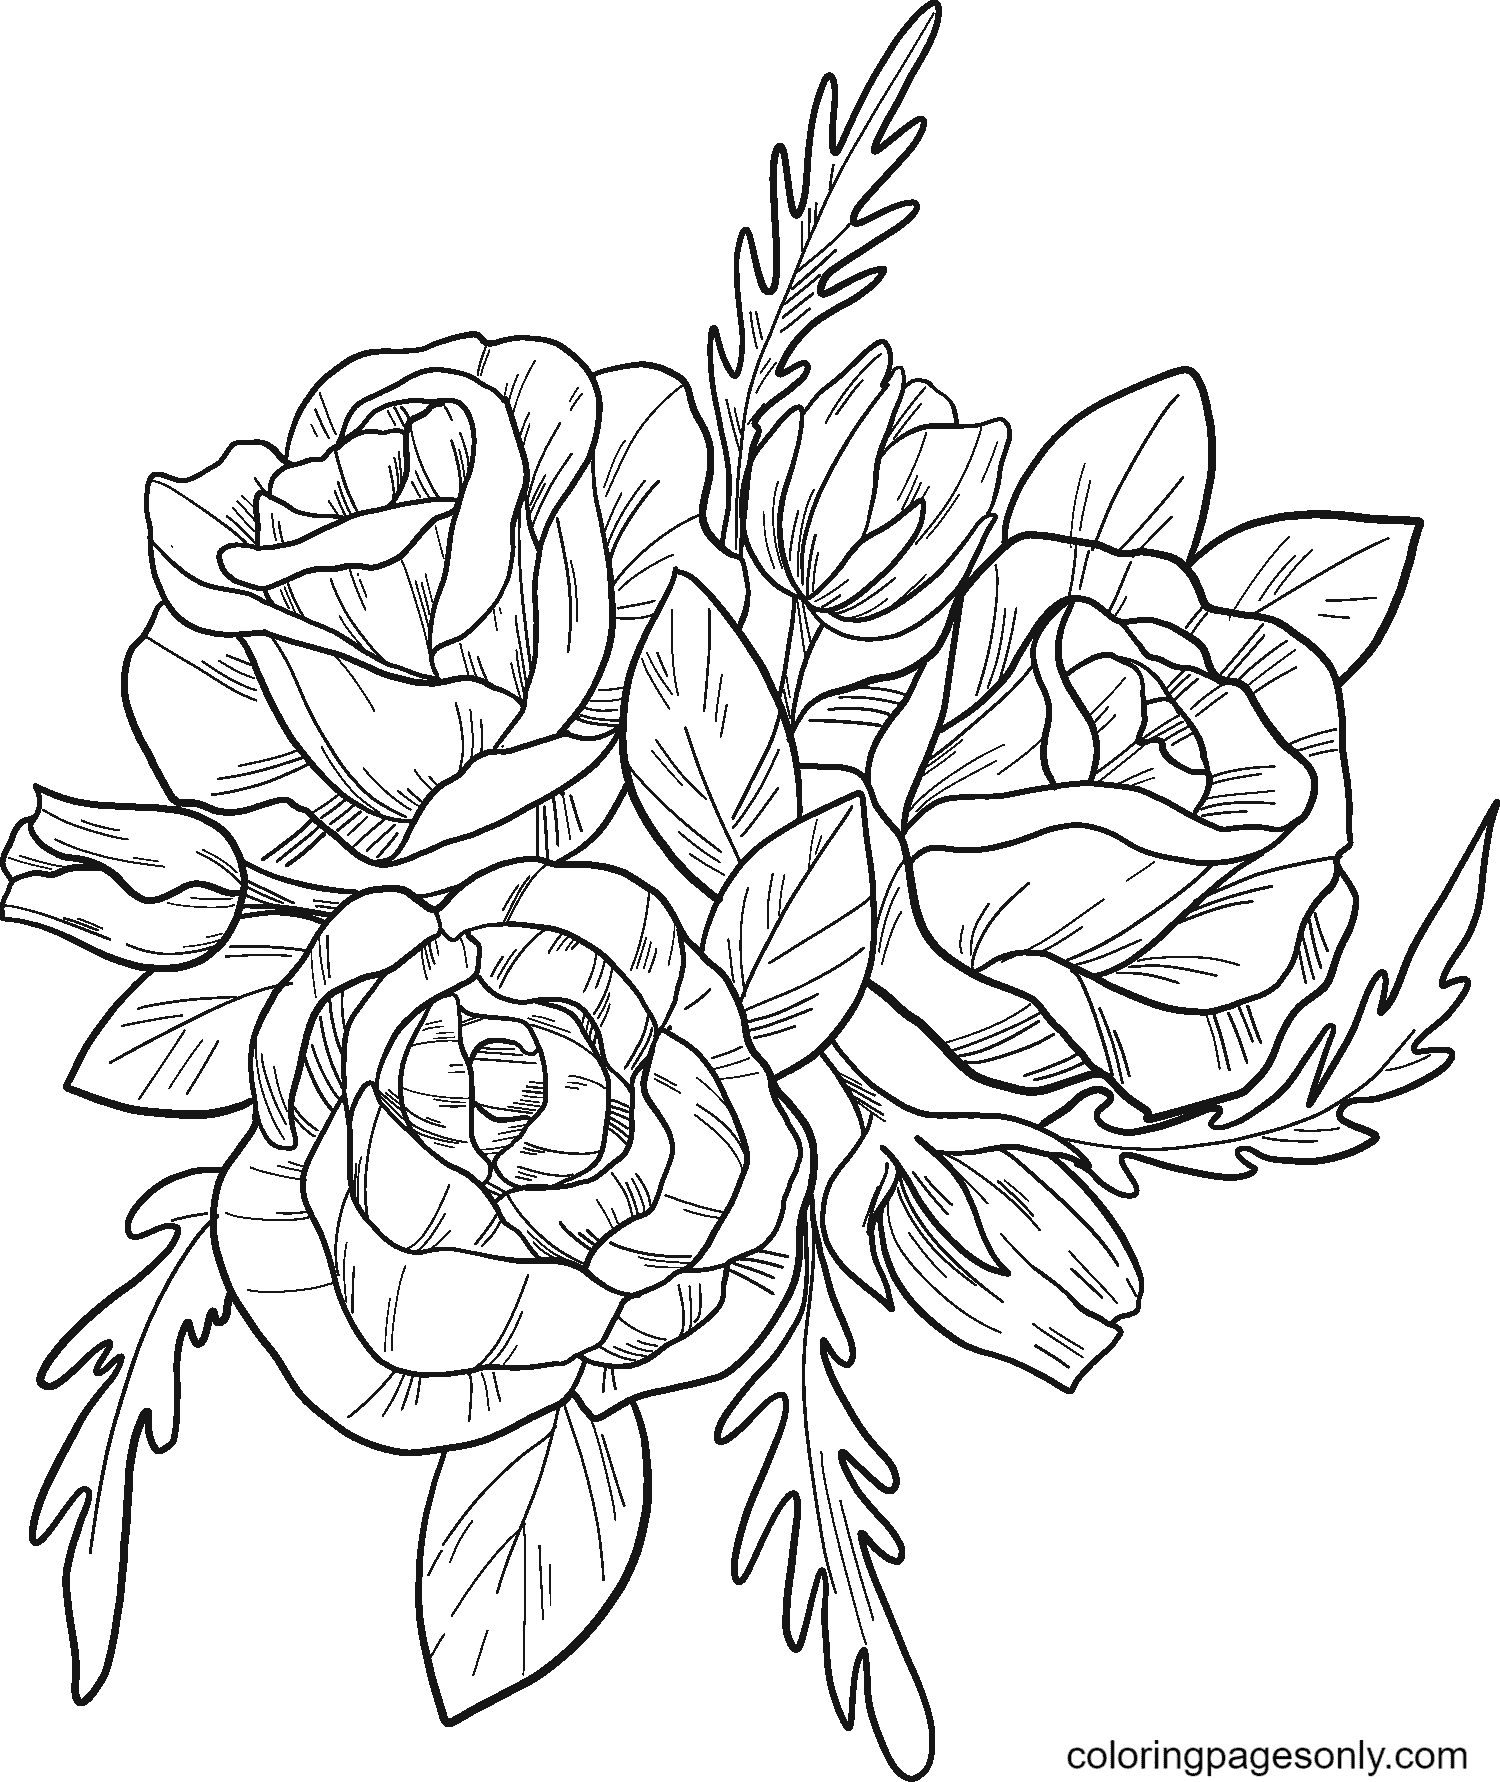 A Beautiful Bouquet of Roses Coloring Page